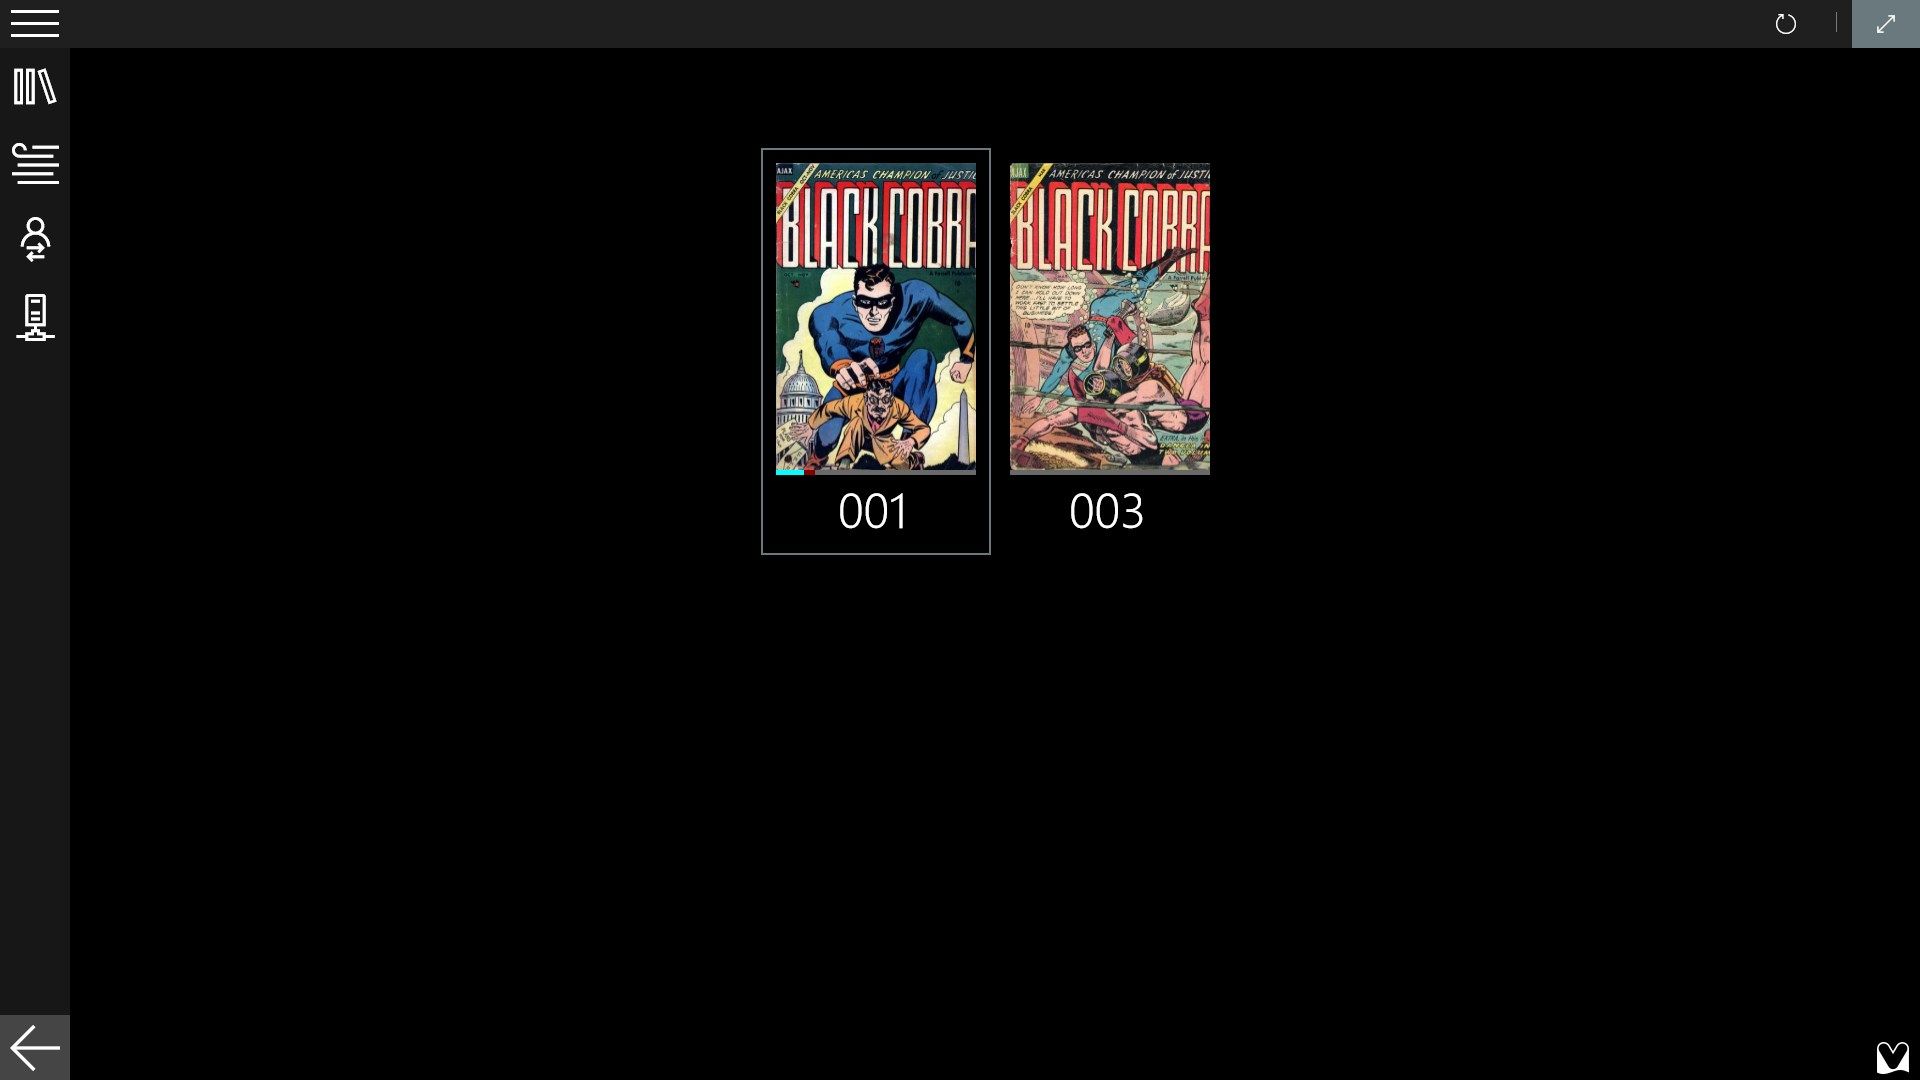 In the series view issue covers are shown in full, progress indicators are displayed below the covers for each issue .